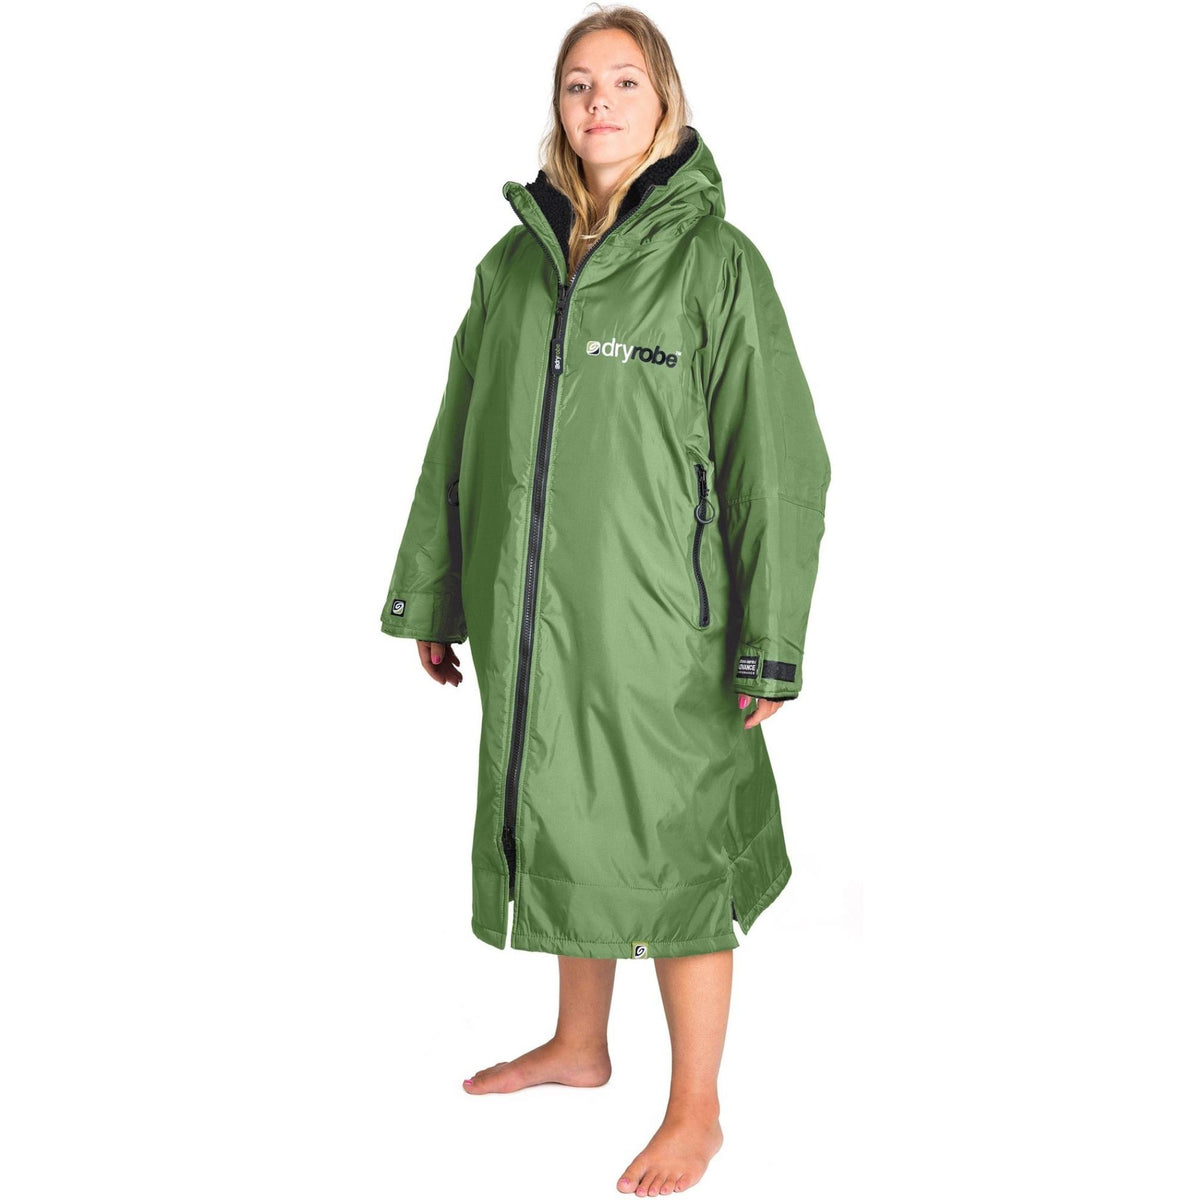 Dryrobe Advance Long Sleeve Drying &amp; Changing Robe - Forest Green/Black - Changing Robe Poncho Towel by Dryrobe